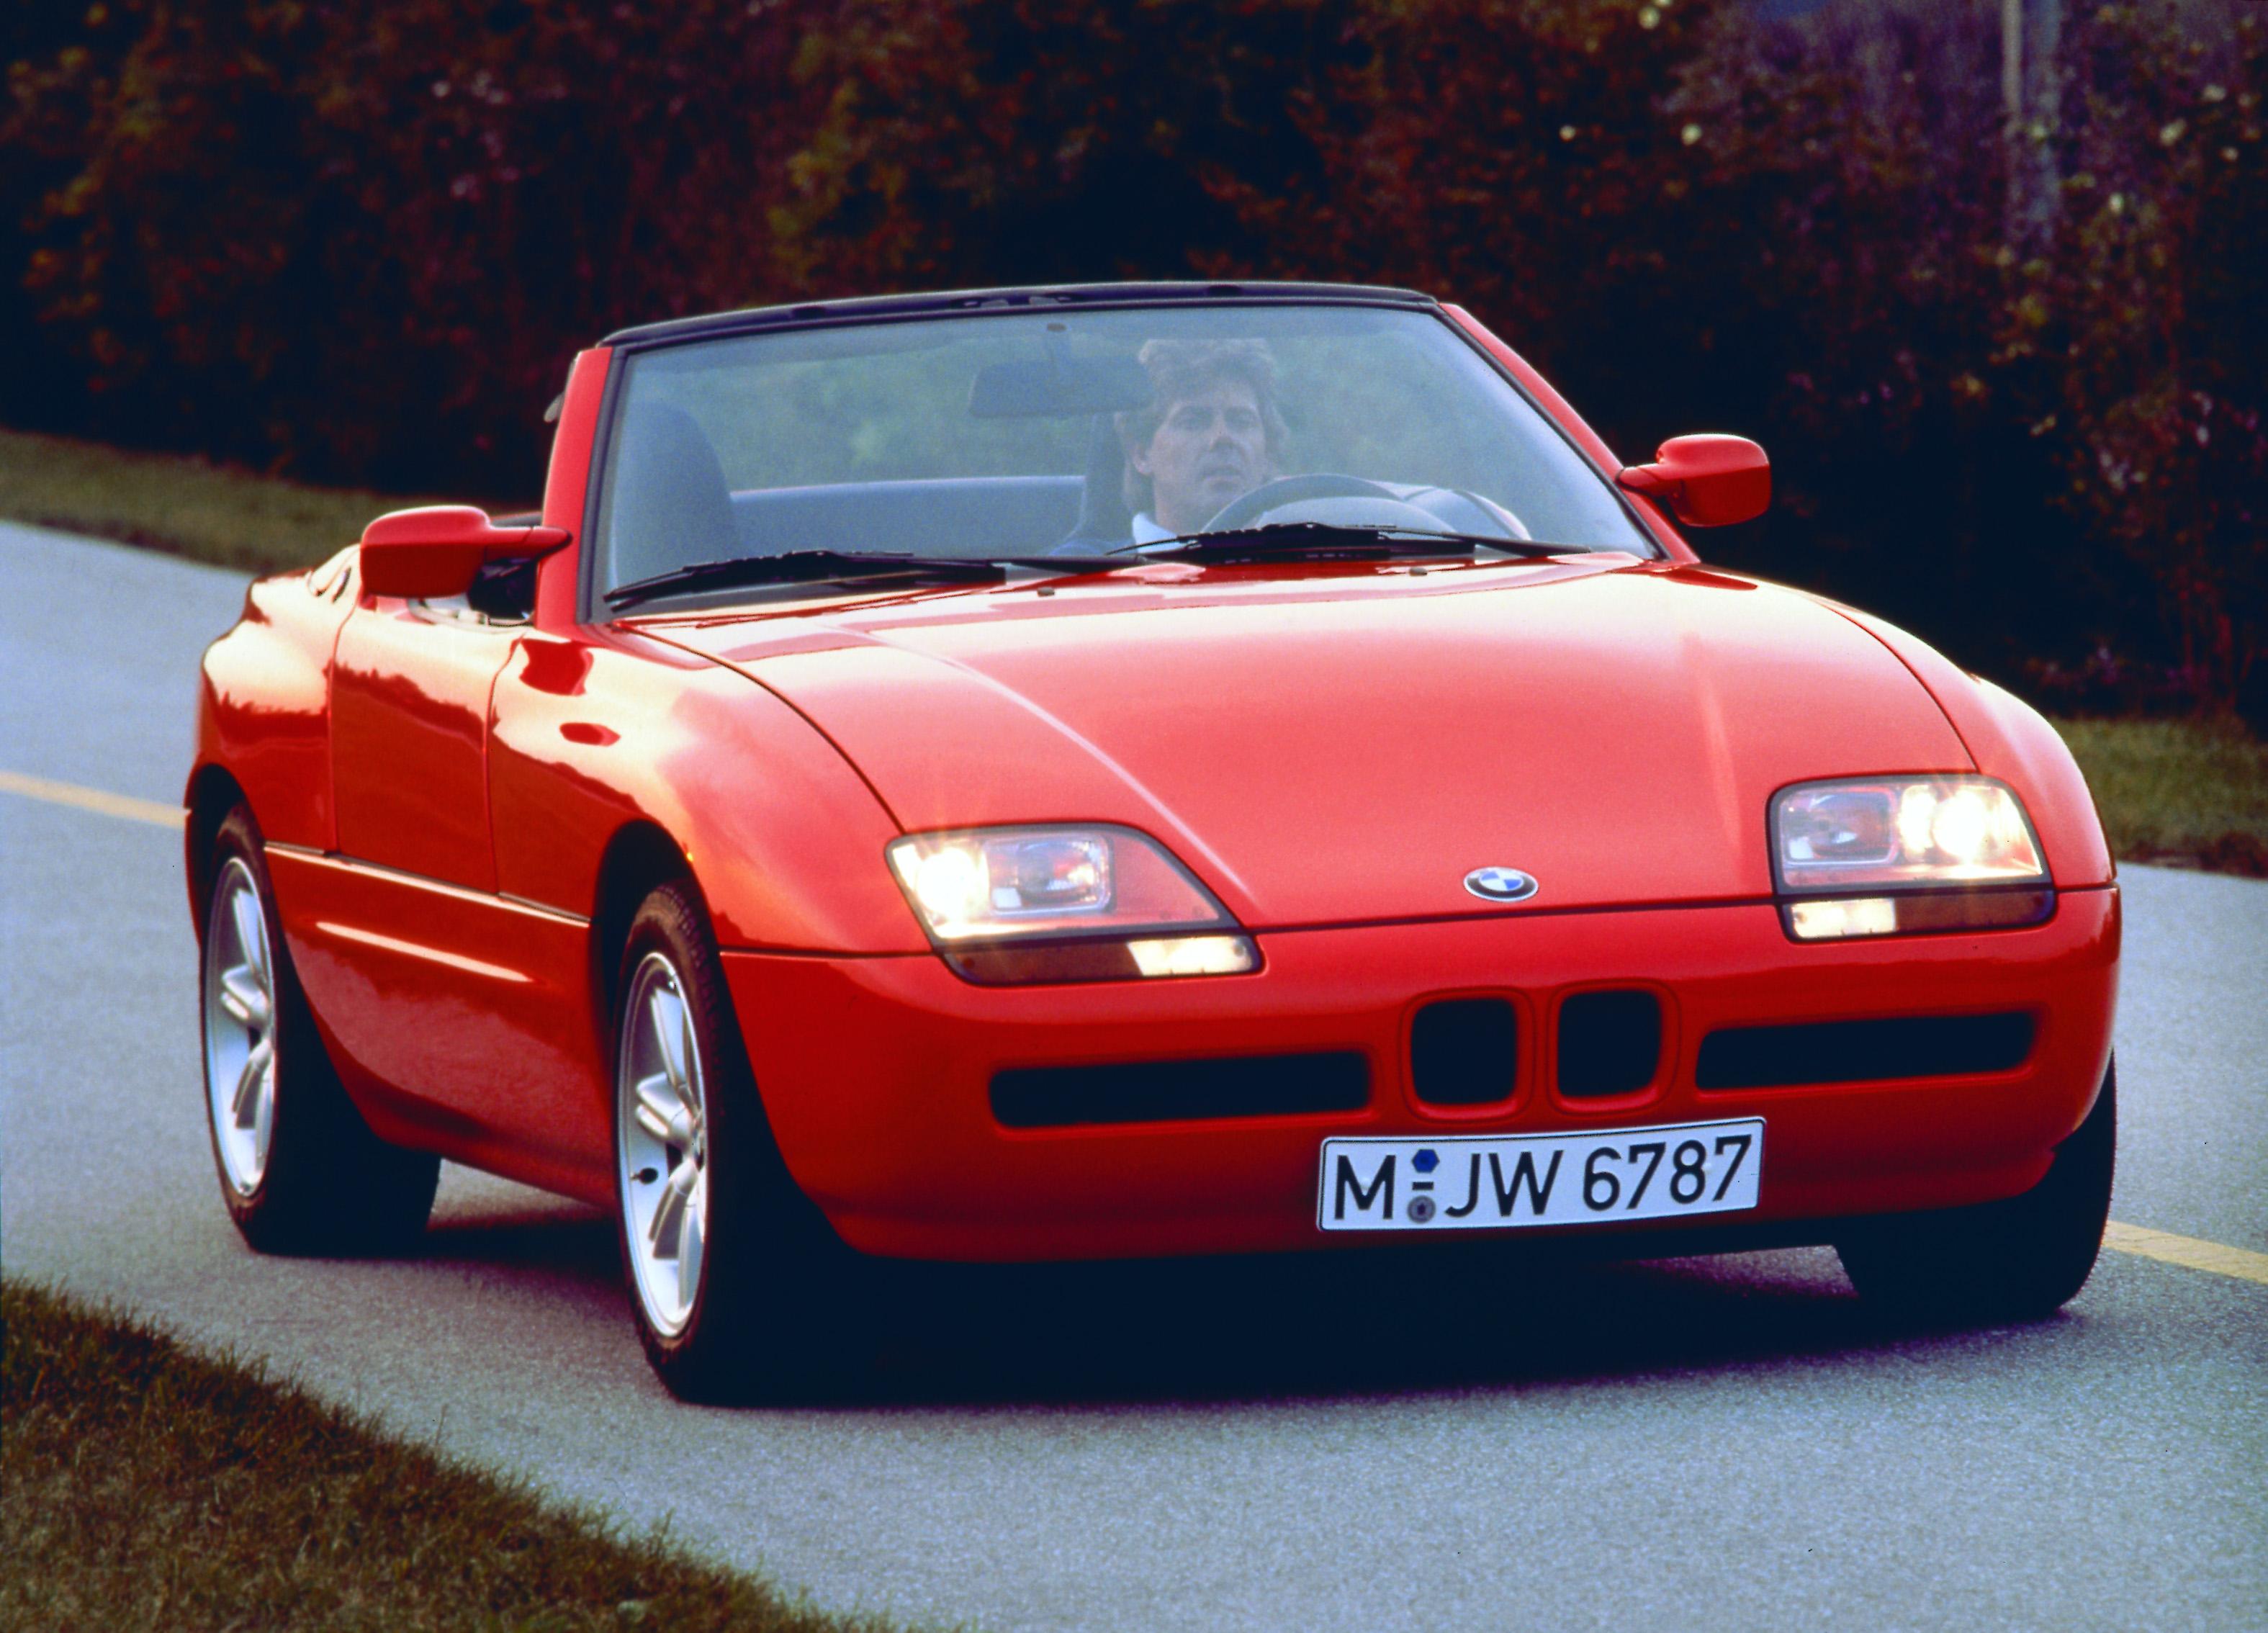 A red BMW Z1 driving down the street